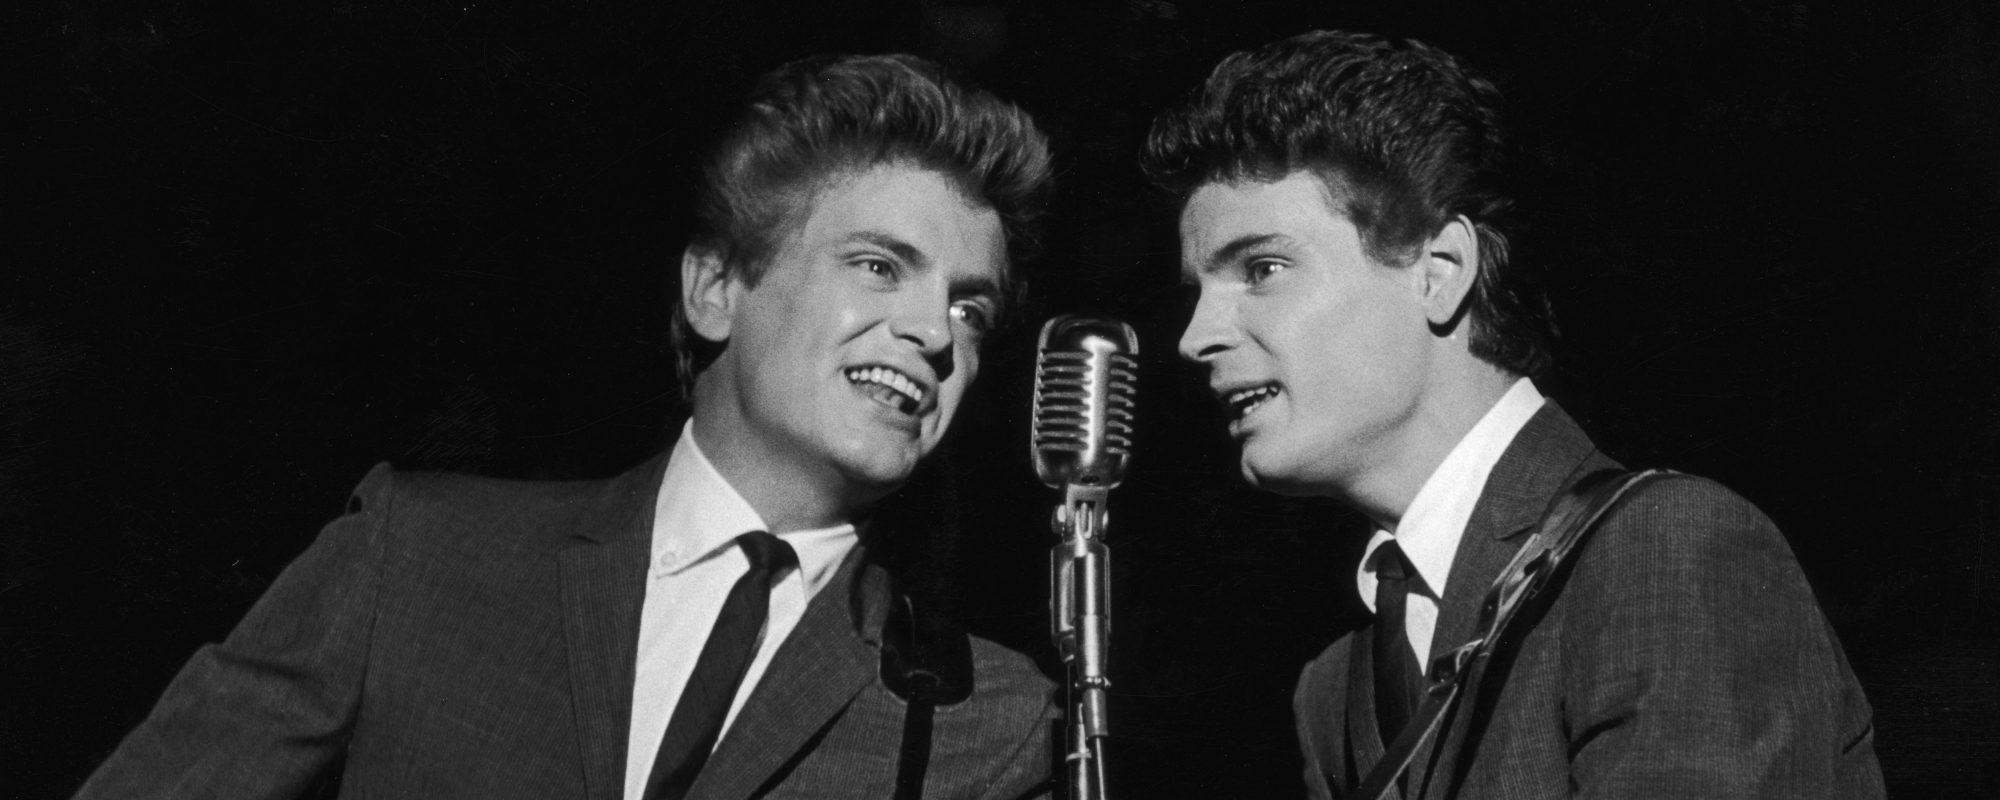 The Classic Ballad The Everly Brothers Never Released as a Single That Turned Into a Hit for Nazareth, “Love Hurts”